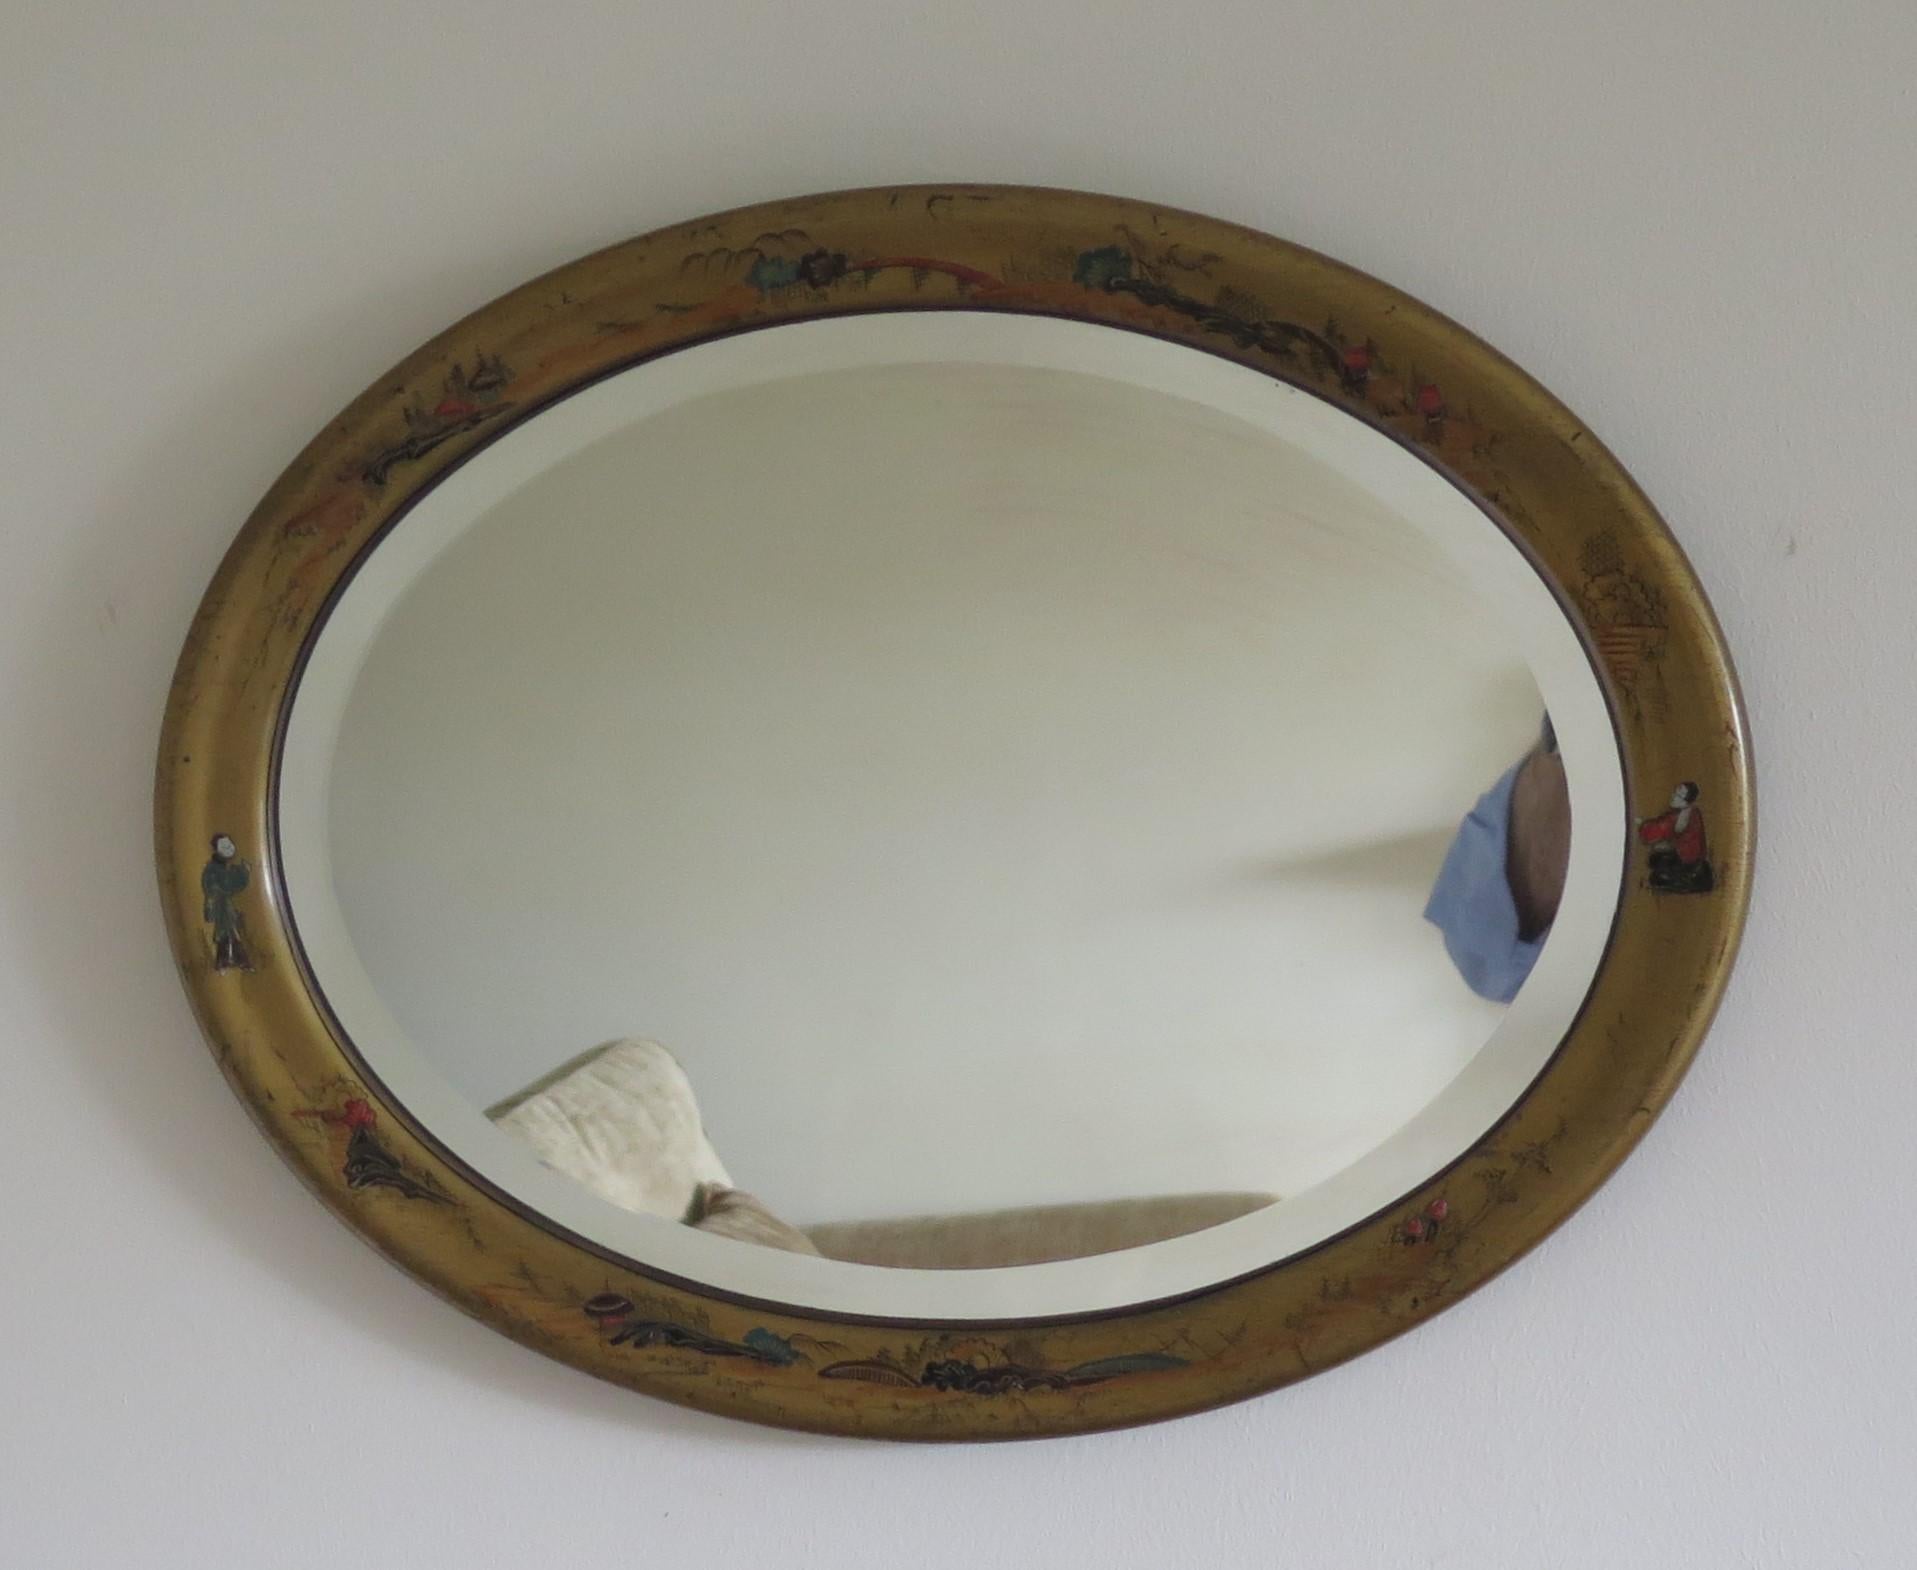 This is a very good oval shaped wall mirror with moulded hand painted Chinoiserie decoration to the frame, with a bevel mirror glass, dating to the turn of the 19th Century, circa 1900.

The oval frame has a gilt-wood finish with raised moulded